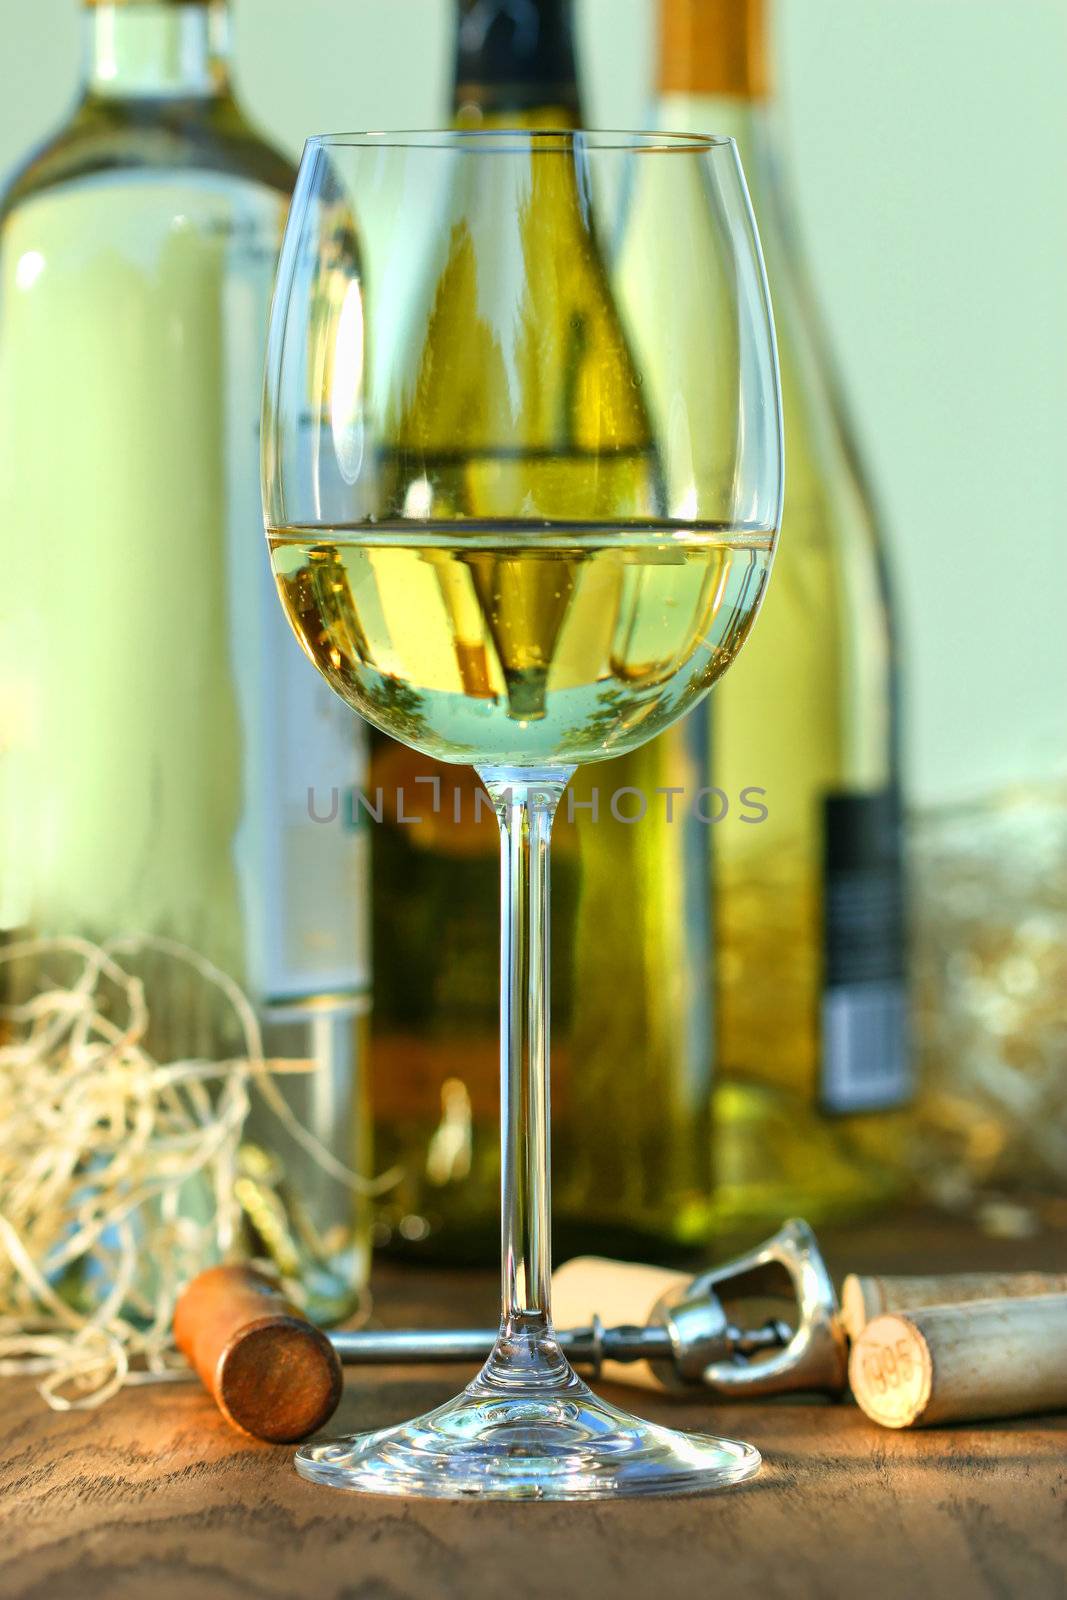 Glass of white wine with bottles by Sandralise